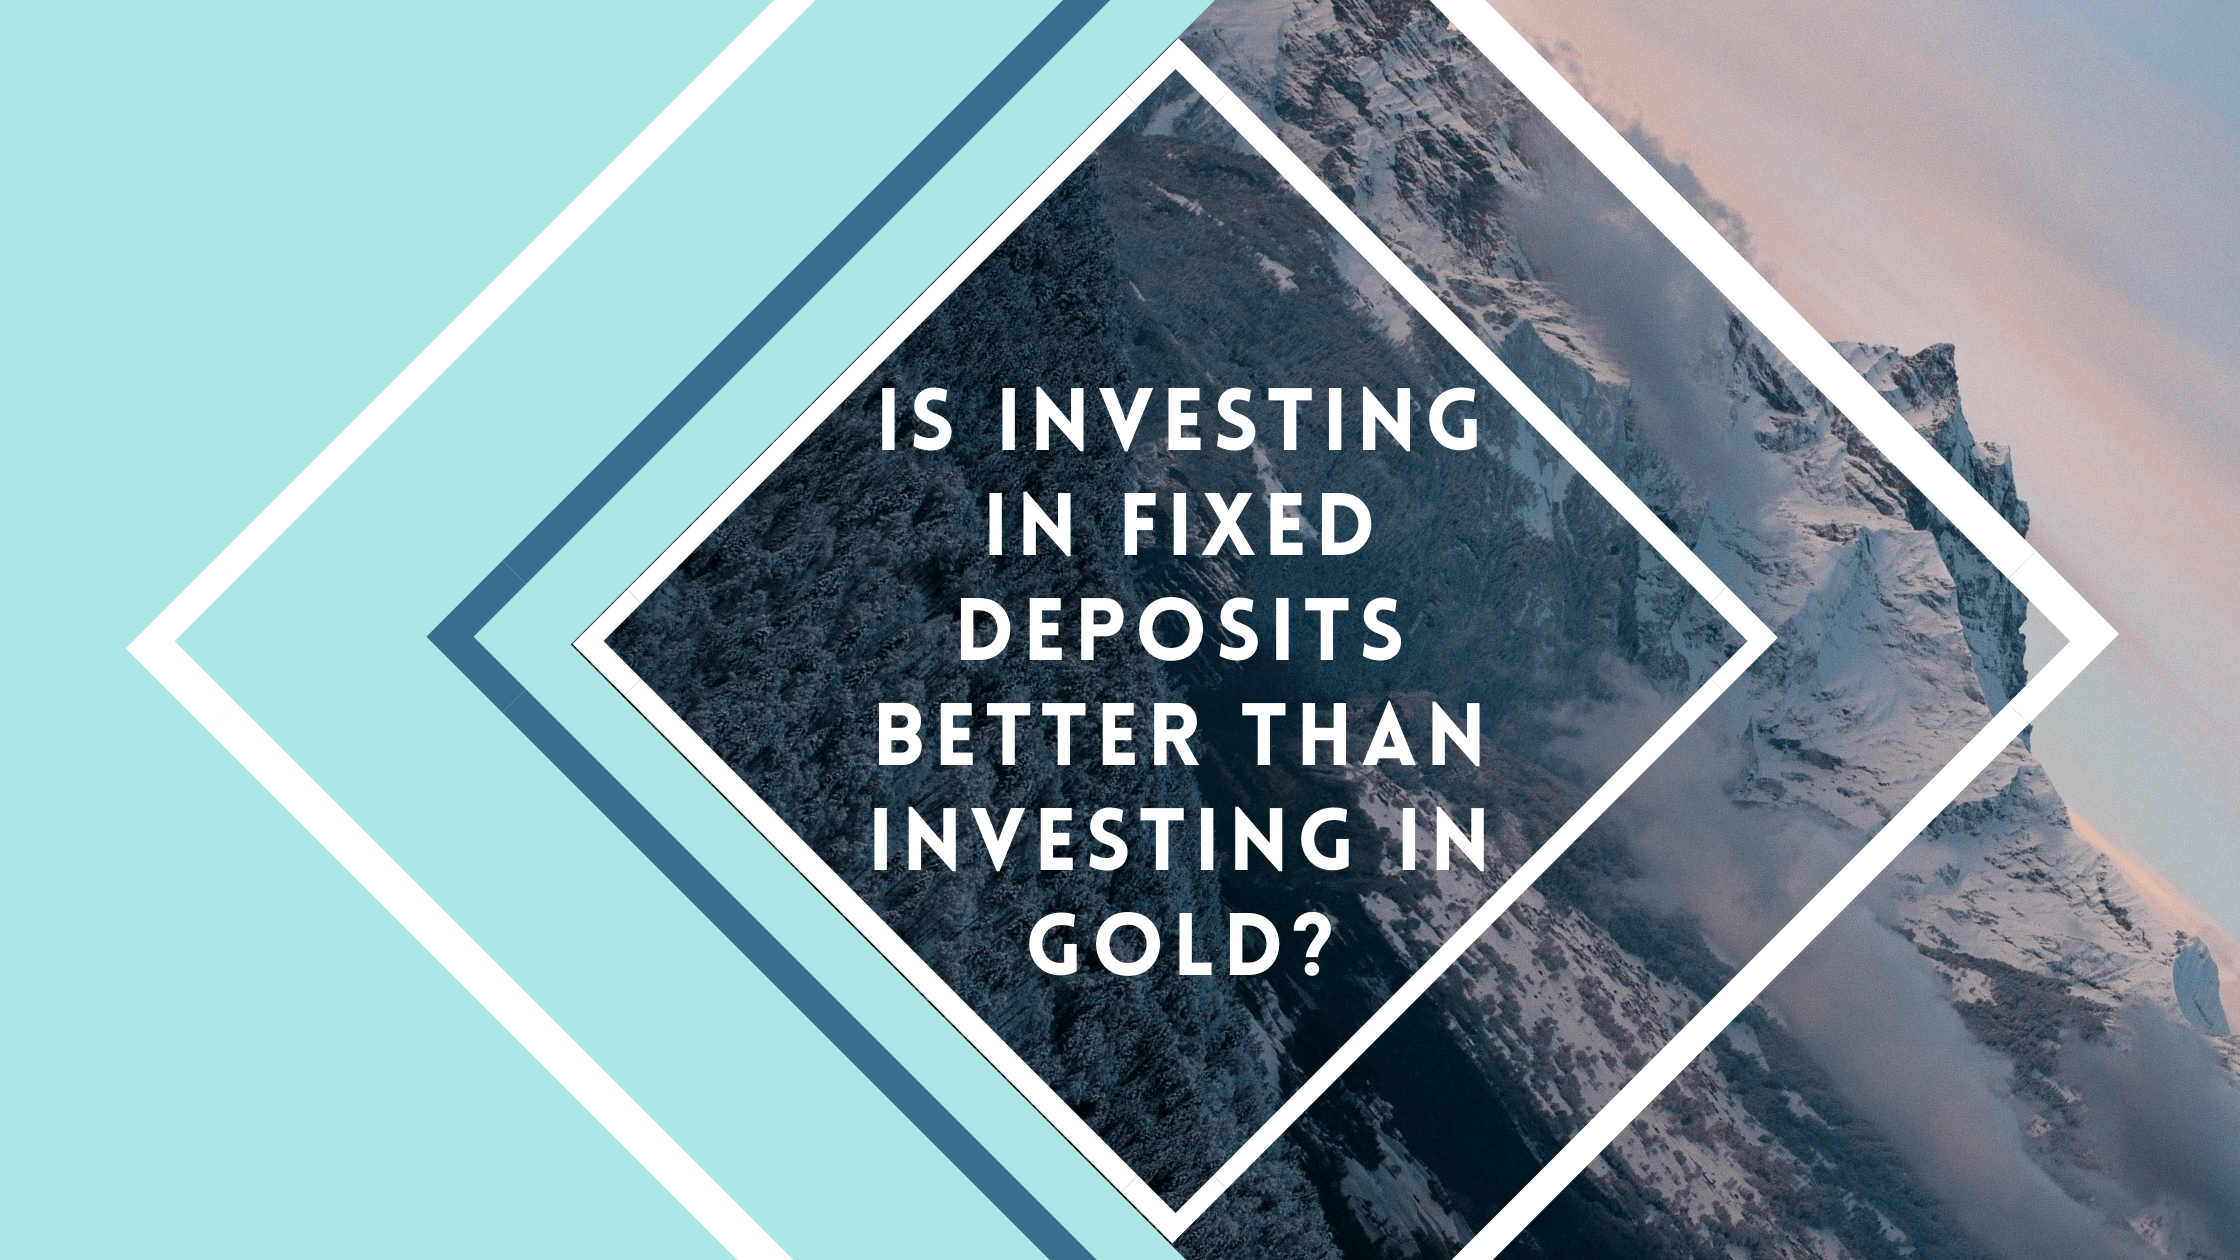 fixed deposits better than investing in gold